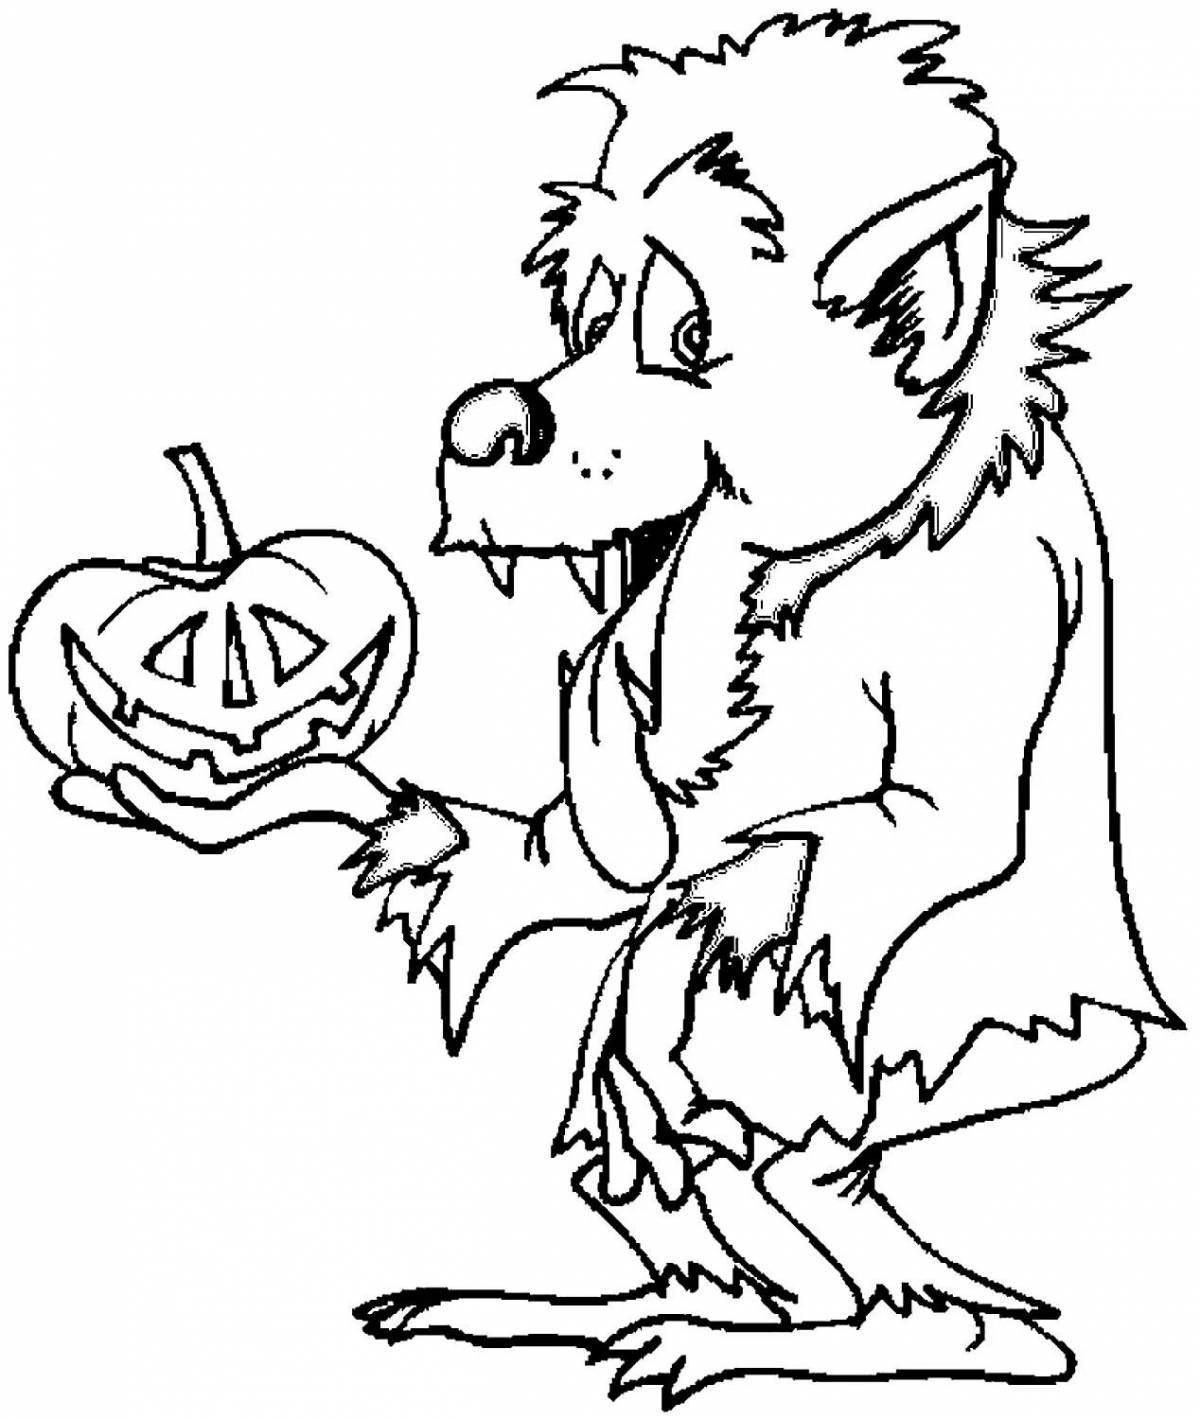 Amazing werewolf coloring book for kids